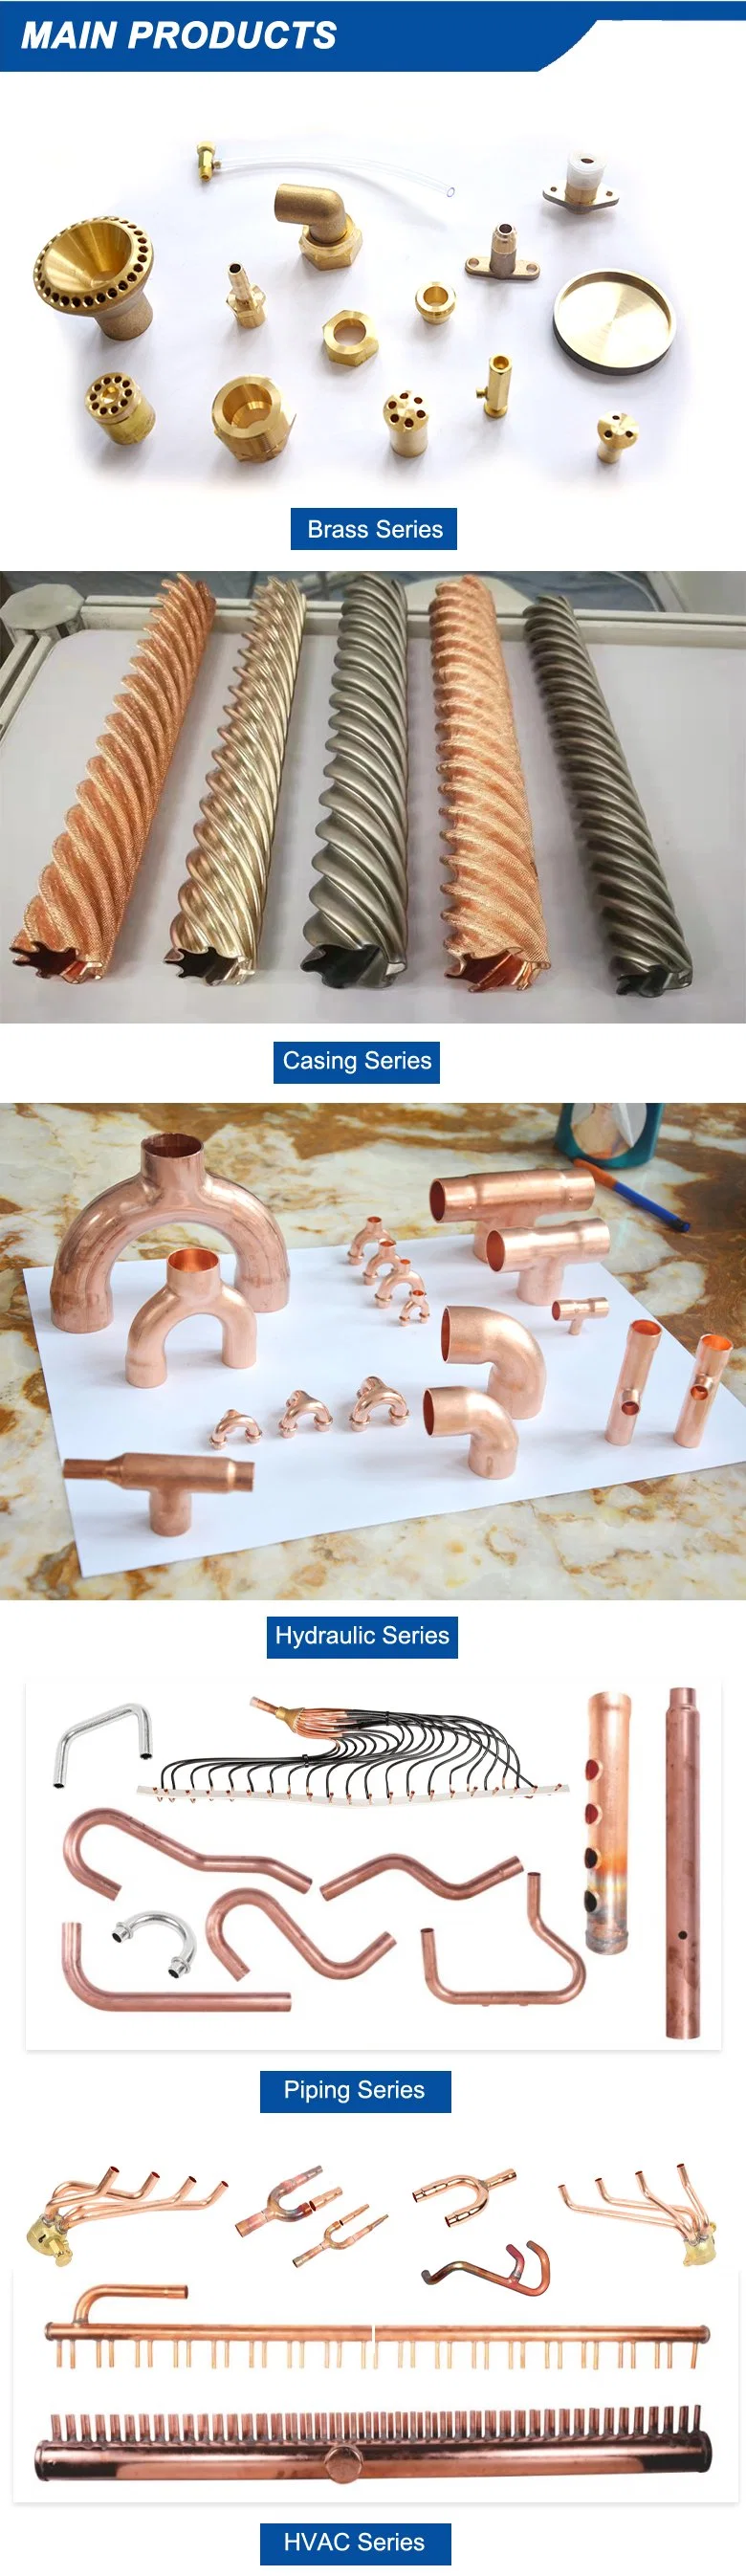 OEM Air Conditioner/Refrigeration Branch Pipe Disperse Pipe Copper Pipe Fittings Copper Y-Type Joint